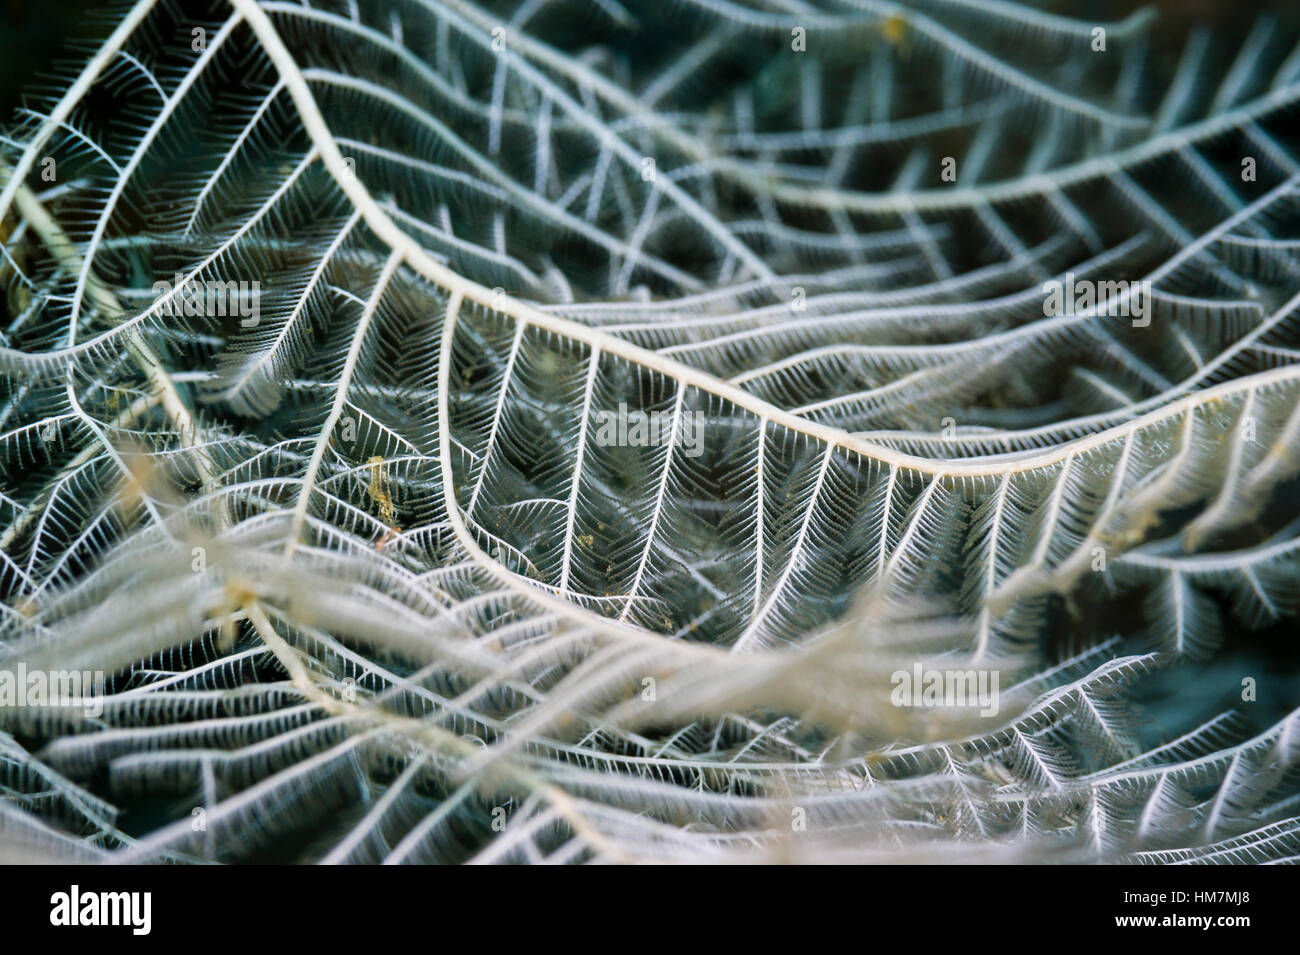 A close-up stinging hydrozoan colony on a coral reef. Stock Photo